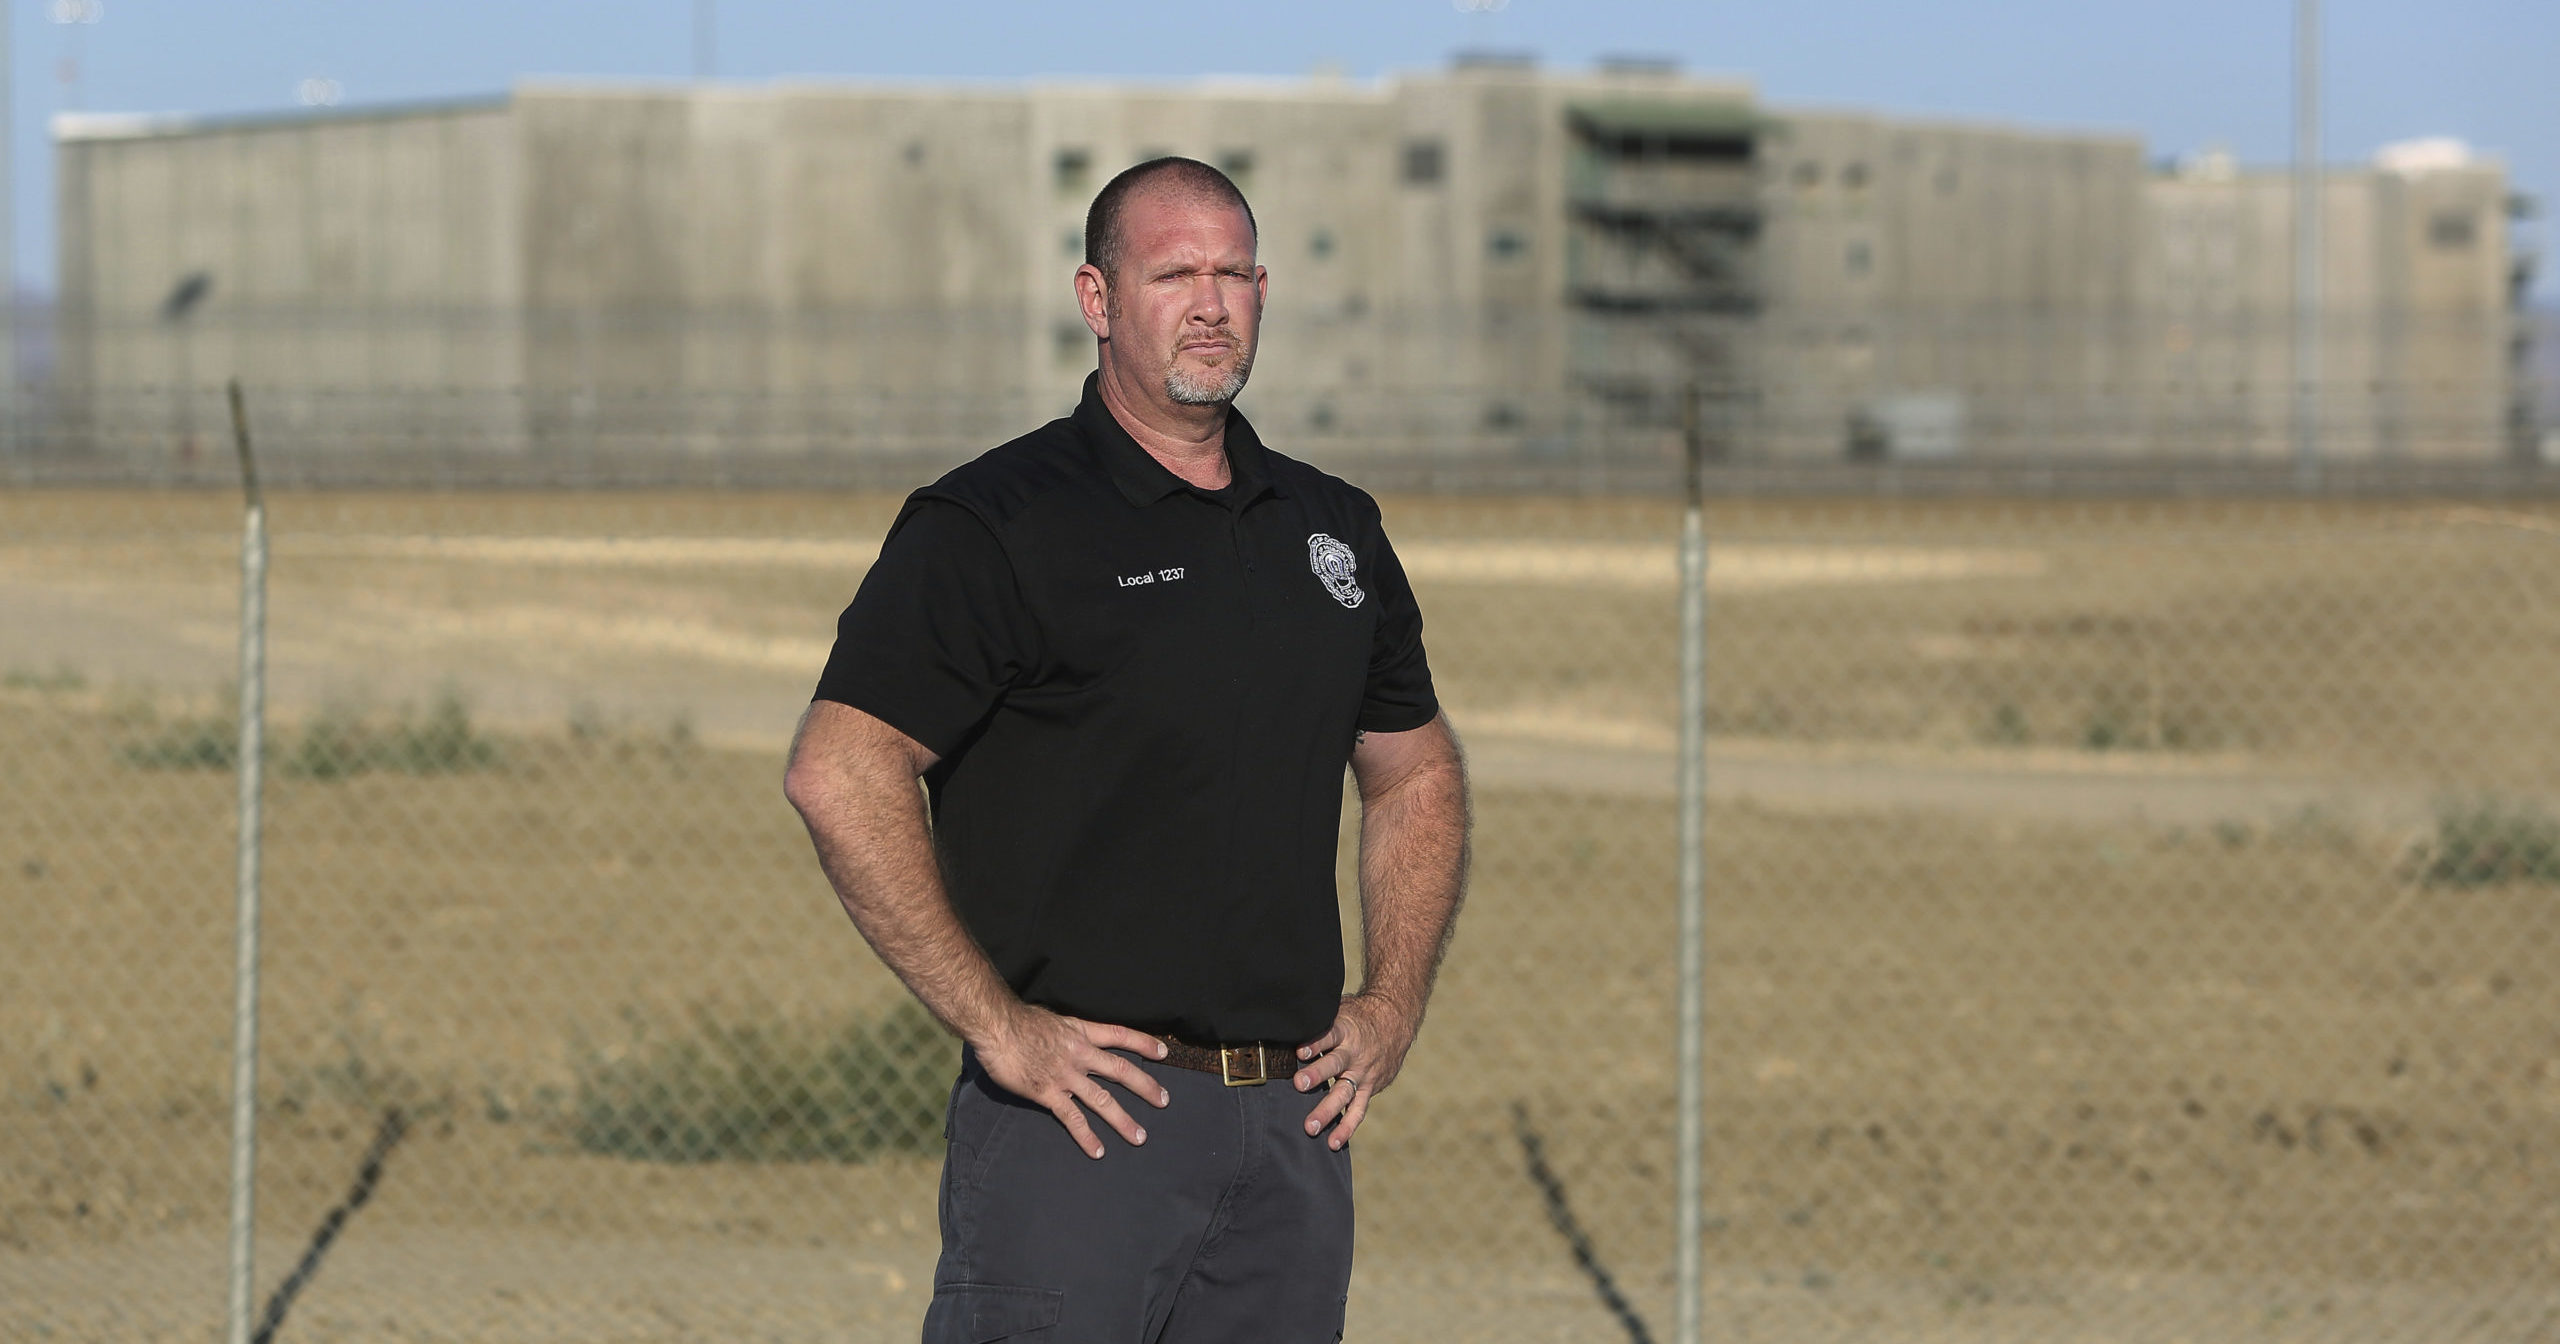 Aaron McGlothin, union president at the Federal Correctional Institution at Mendota, stands in front of the prison during a protest against staffing shortages in Mendota, California, on Monday.